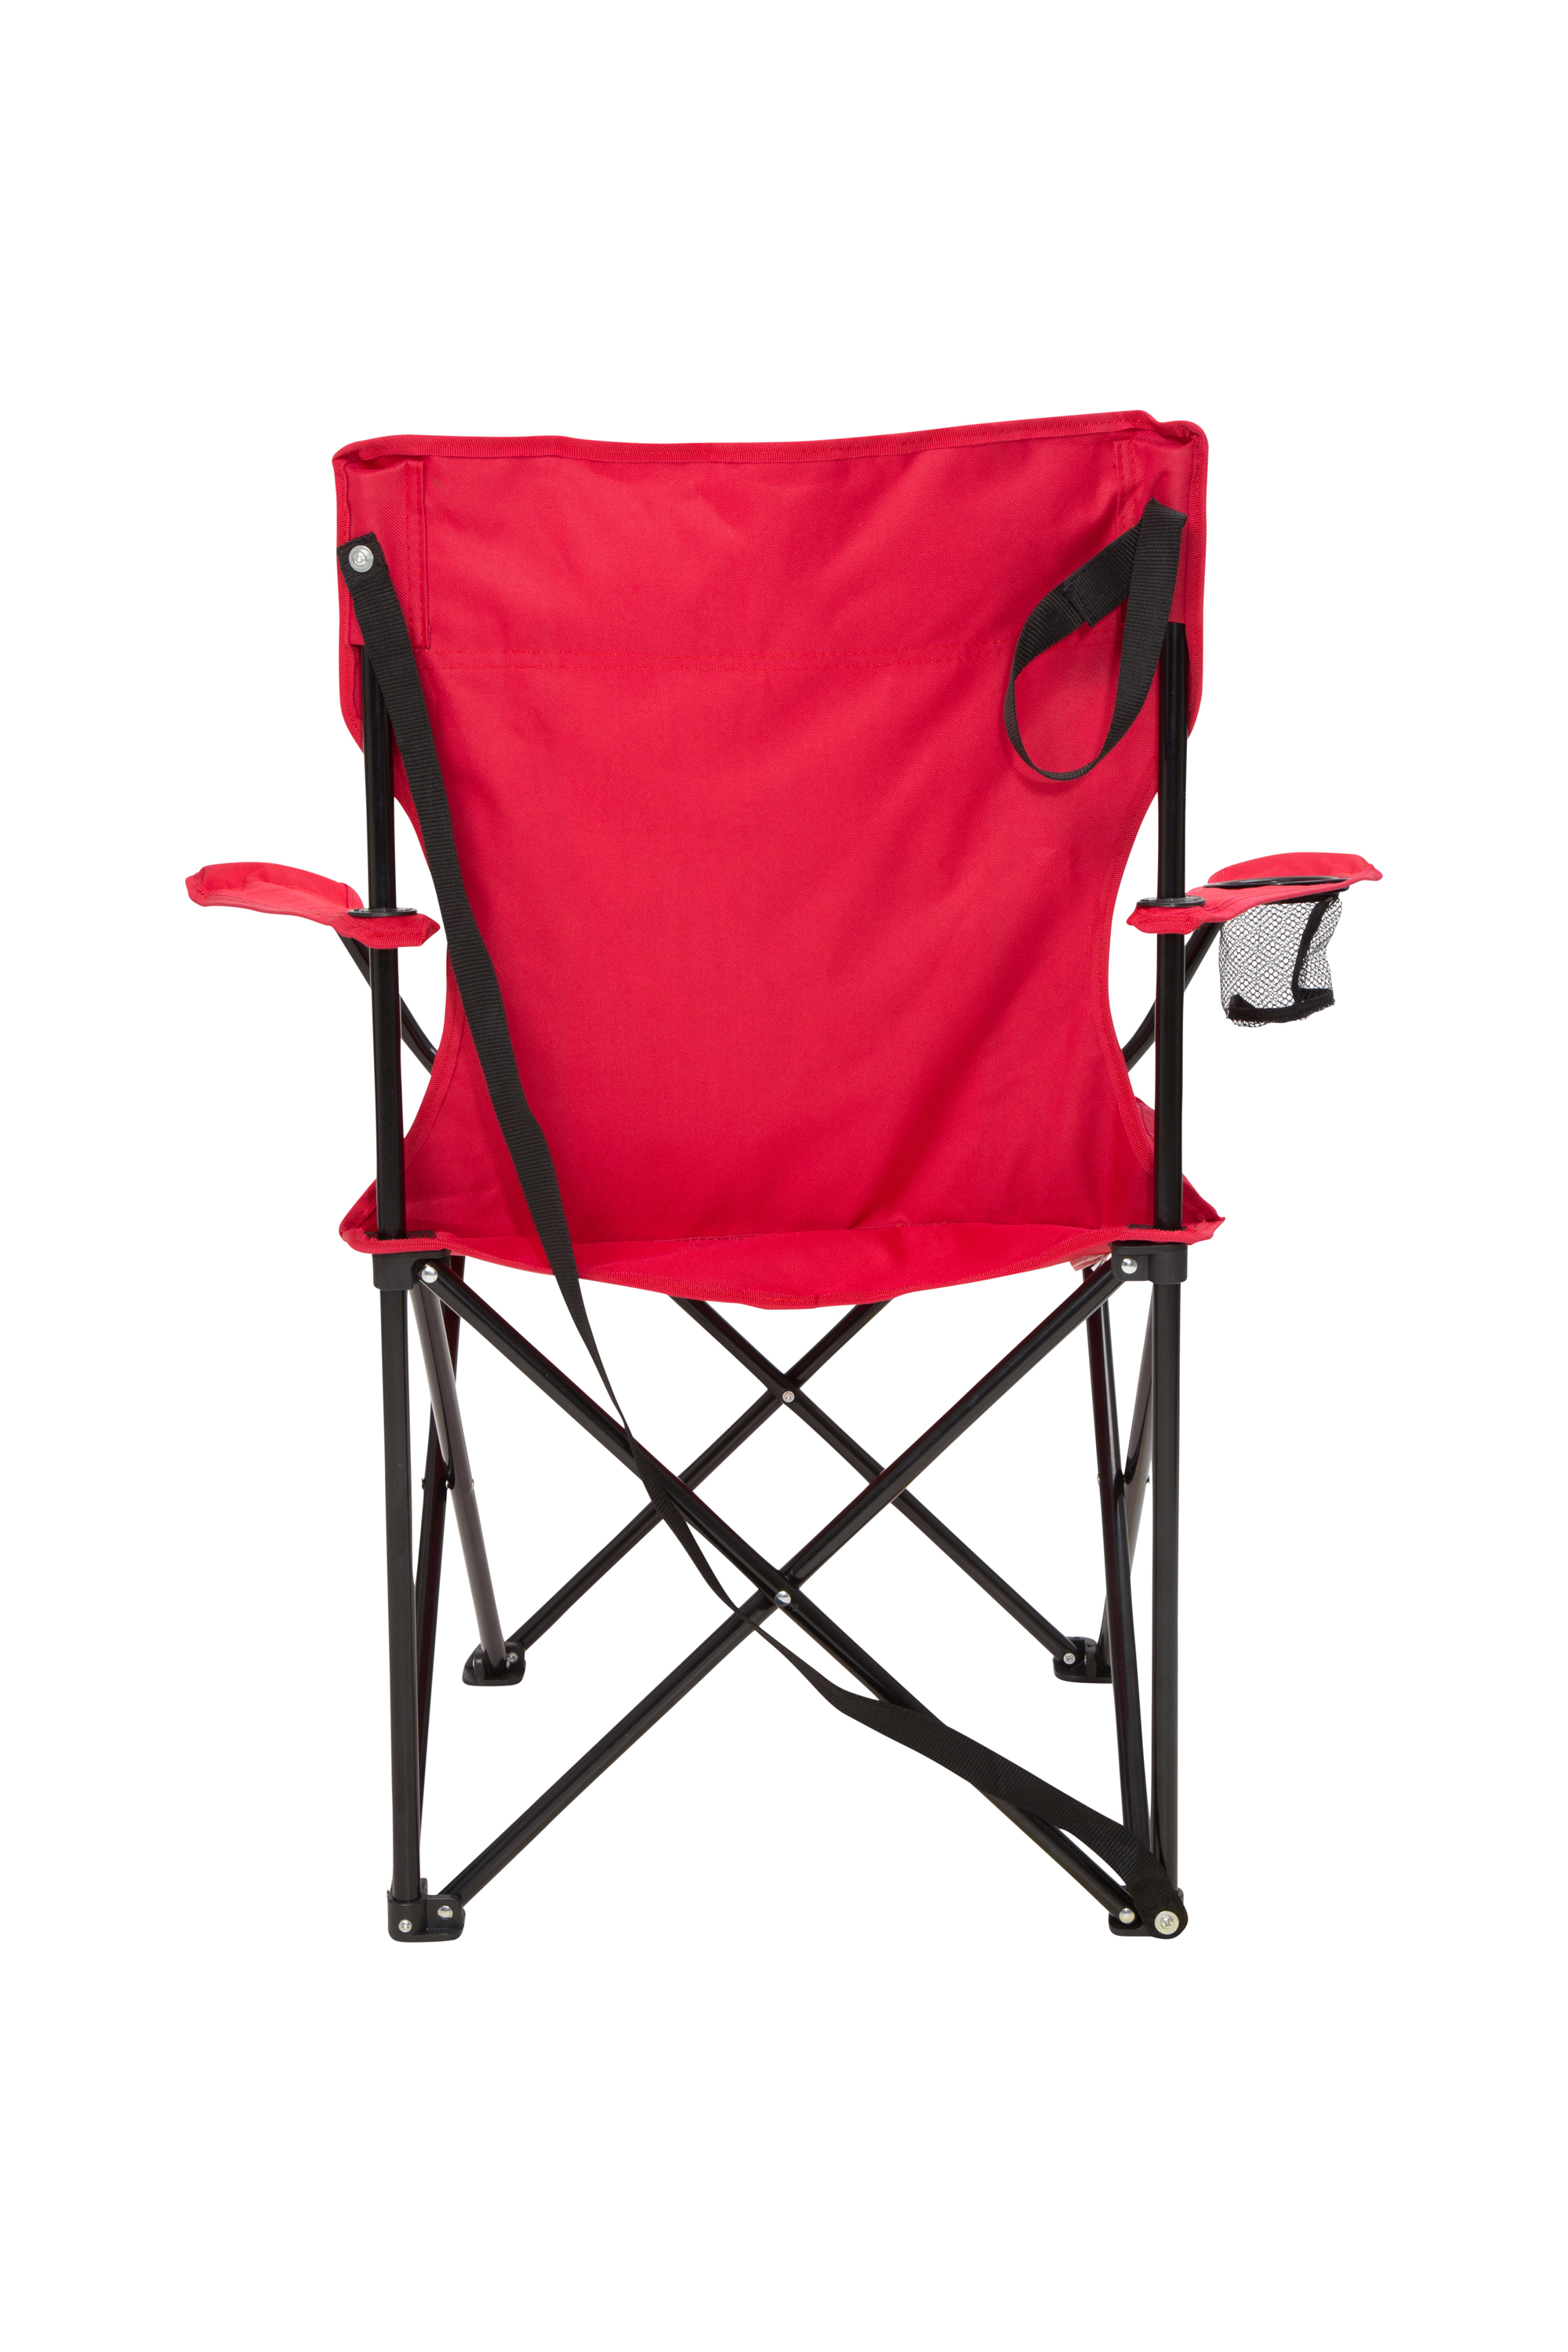 Red folding chair photo